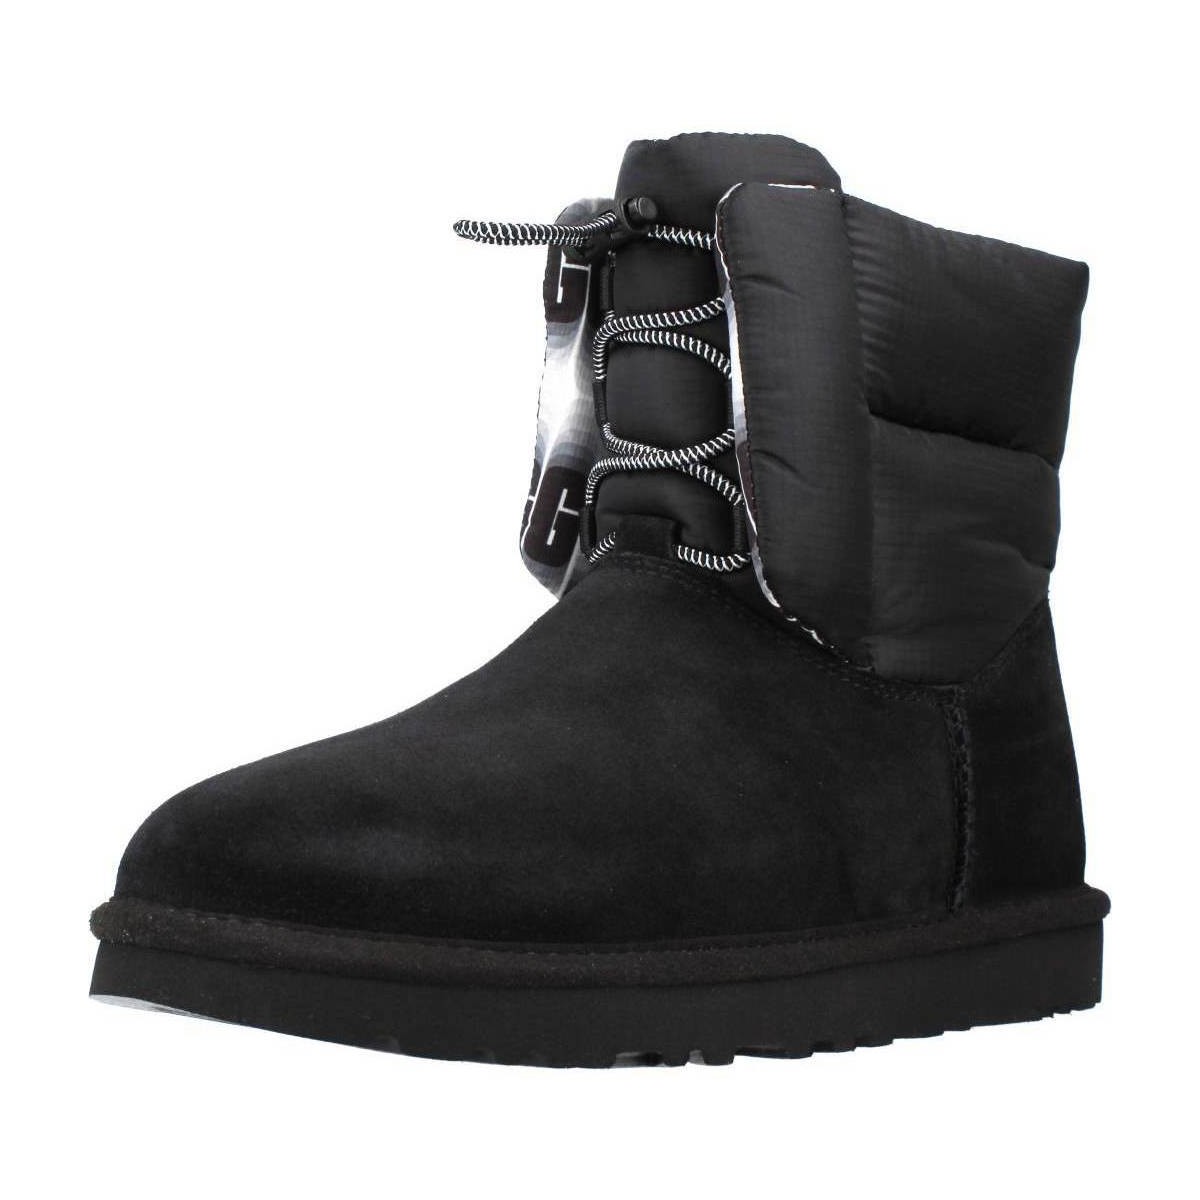 Chaussures Femme Bottines UGG W CLASSIC MAXI TOGGLE Noir